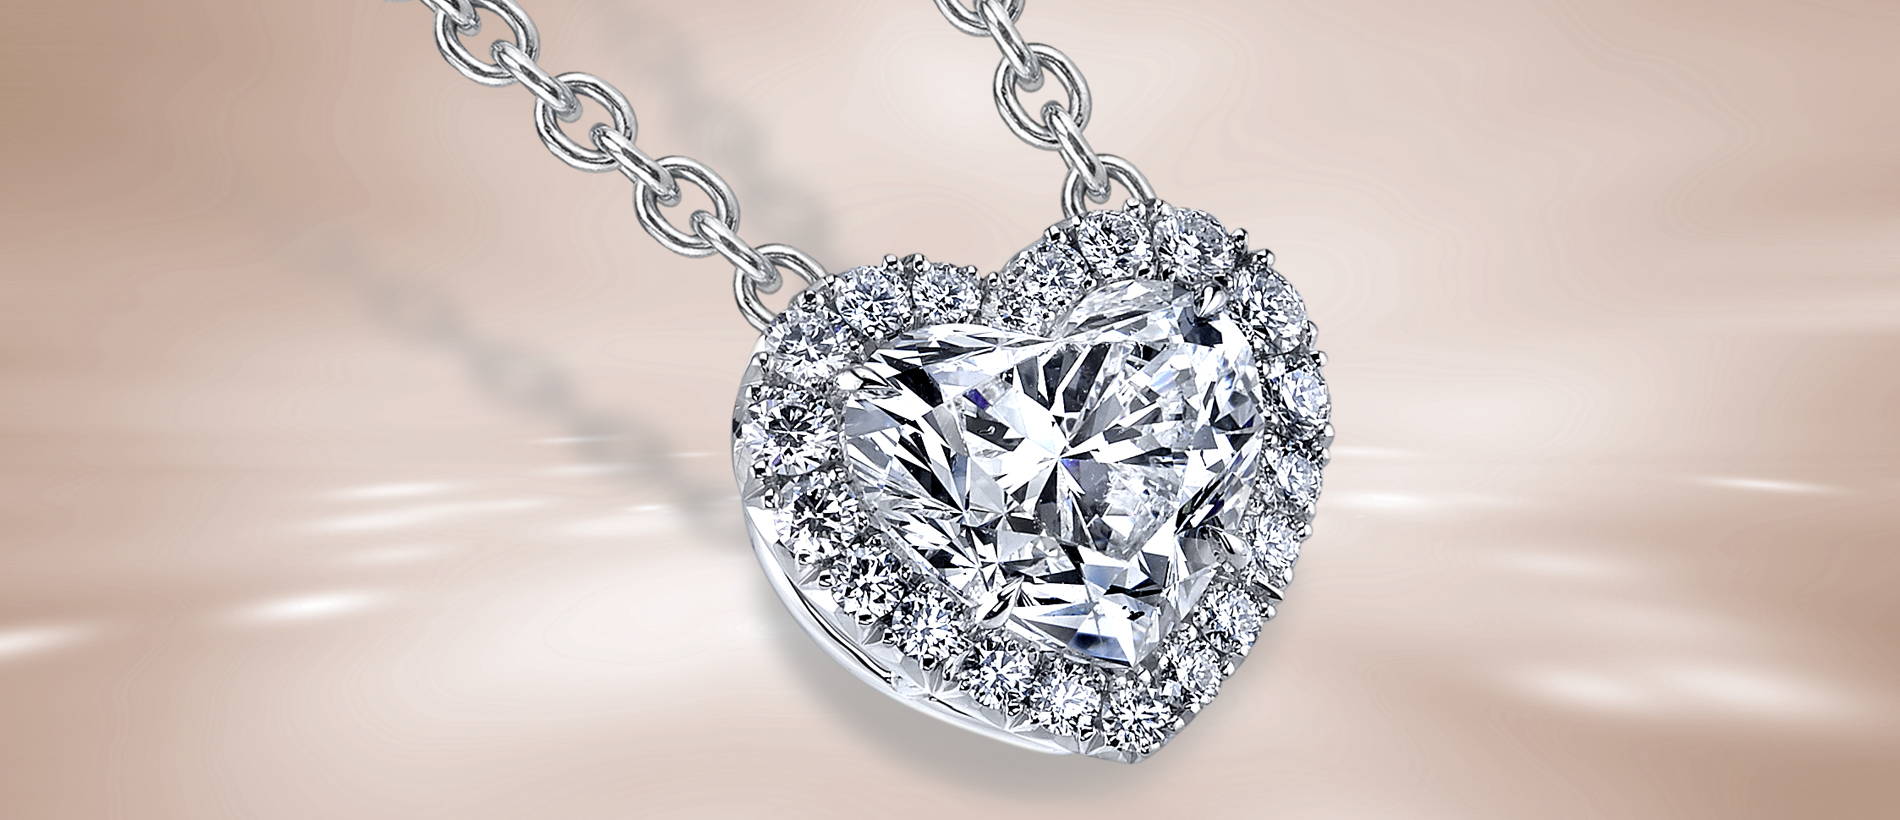 Picture of a heart shaped diamond necklace with diamond accents on a brown background